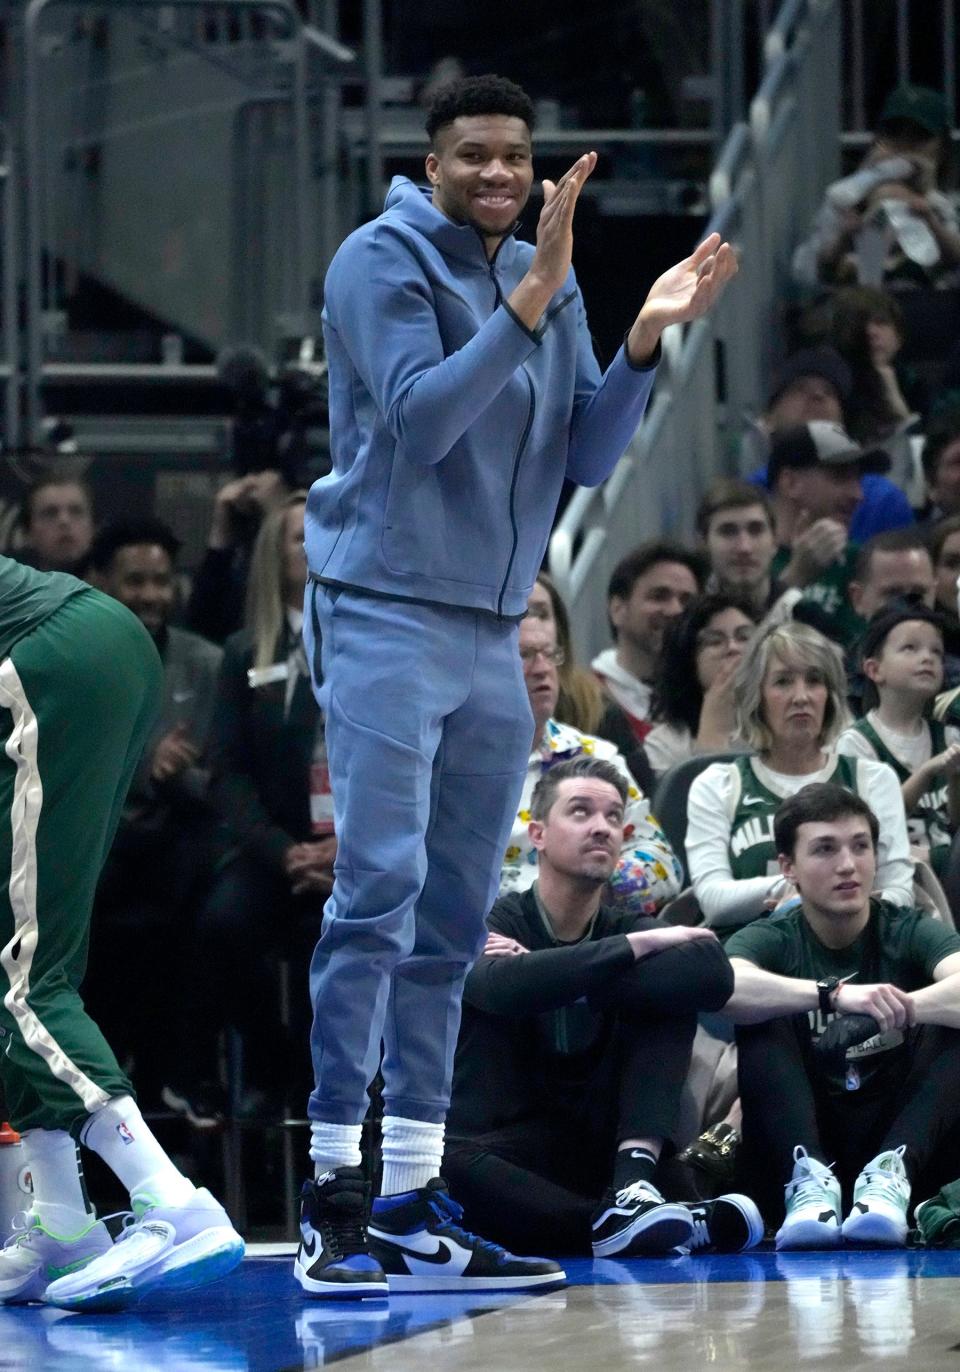 Milwaukee Bucks forward Giannis Antetokounmpo cheers from the bench as his teammates battle the Phoenix Suns at Fiserv Forum in Milwaukee on Sunday.